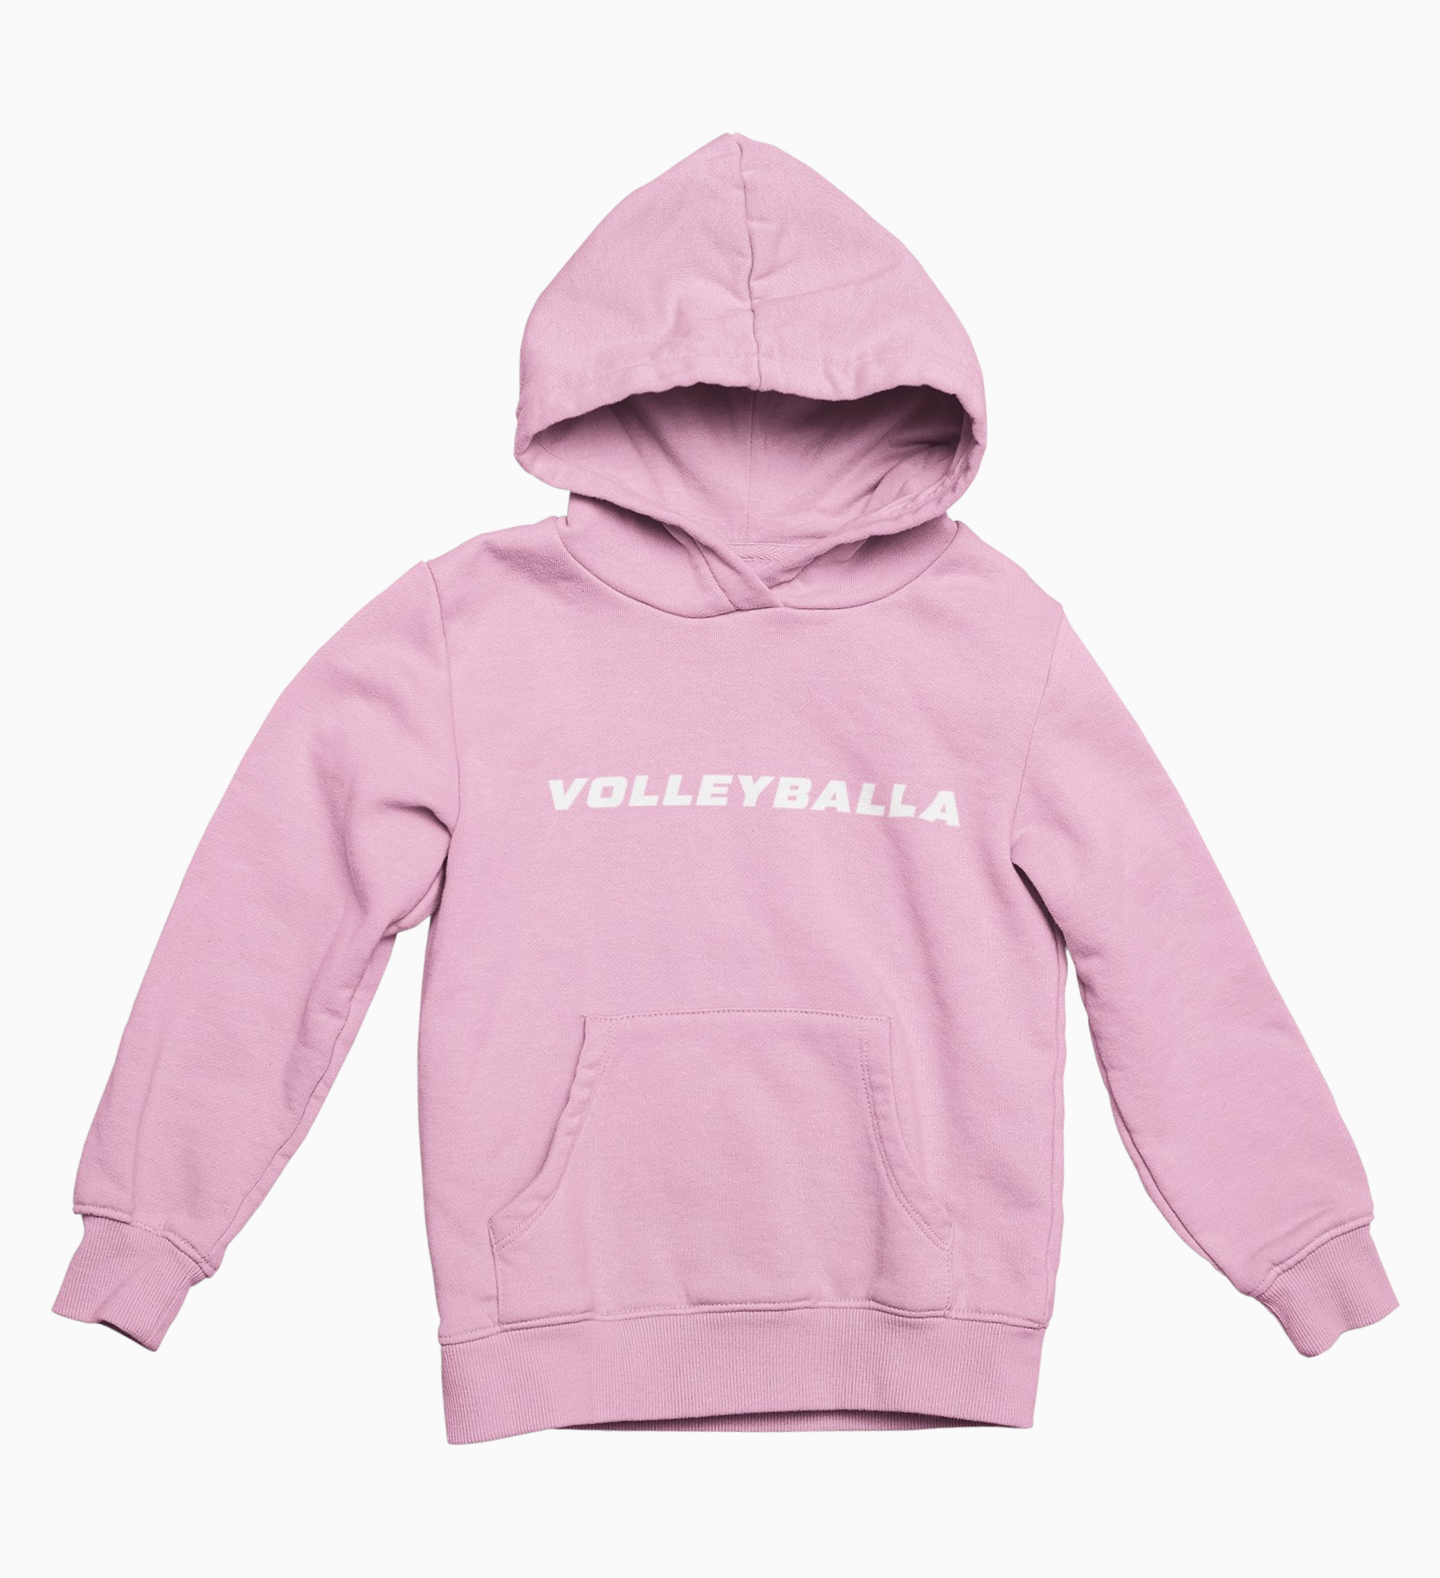 Classic Volleyballa Heavyweight Pullover Hoodie